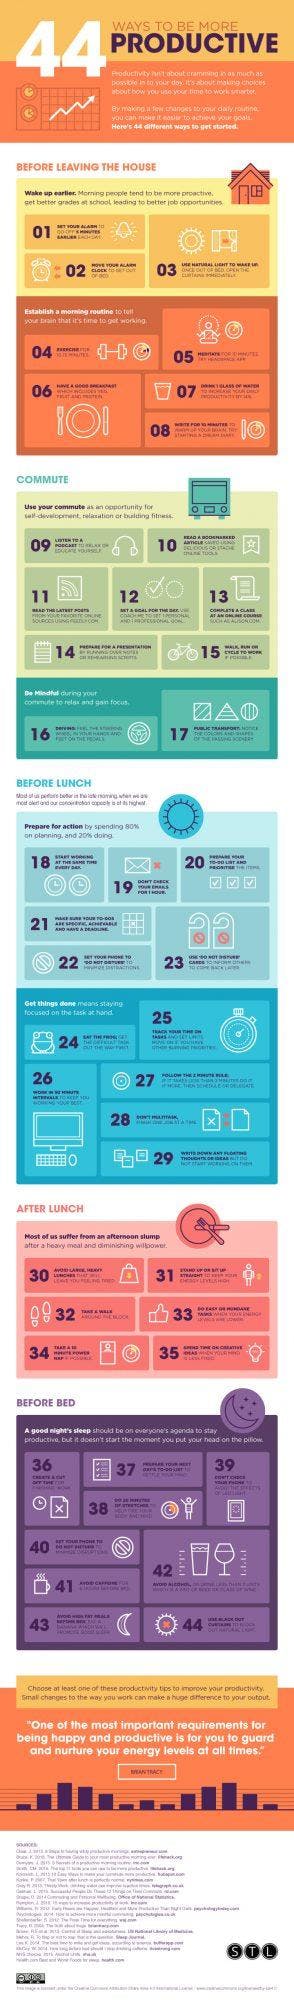 44-ways-to-be-more-productive